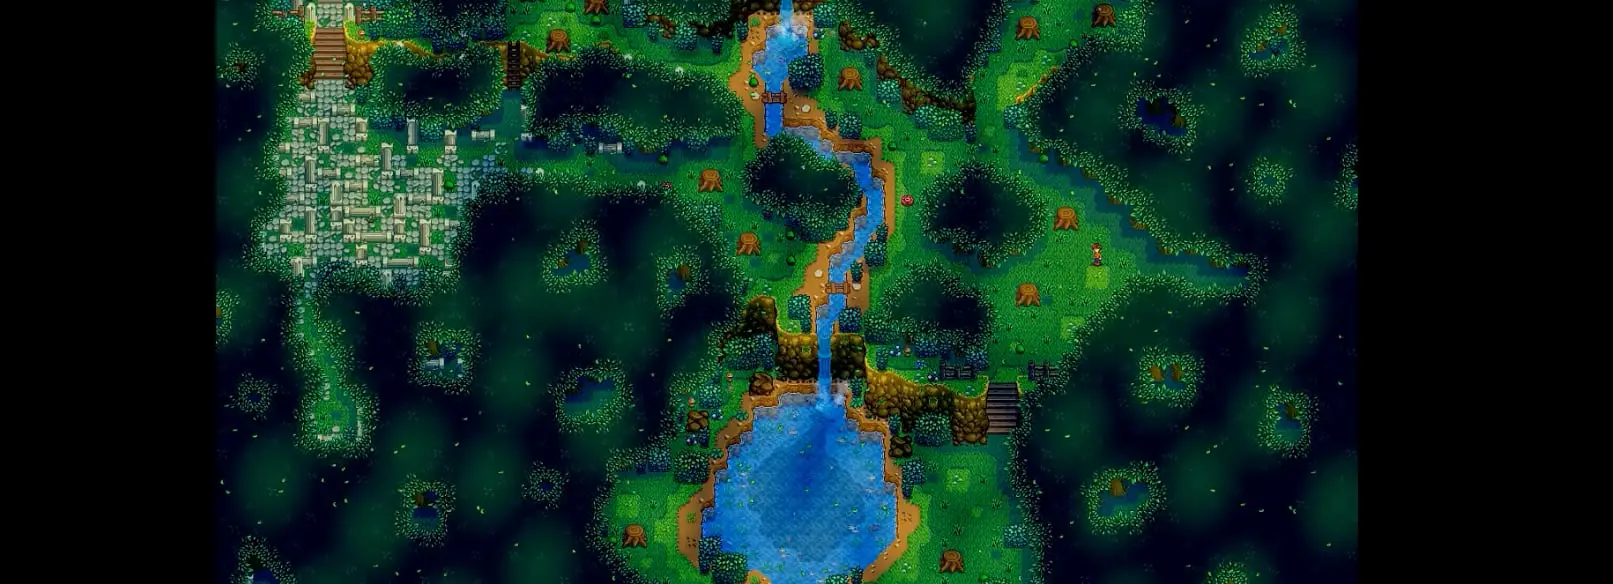 A screenshot of the Secret Woods in Stardew Valley Expanded